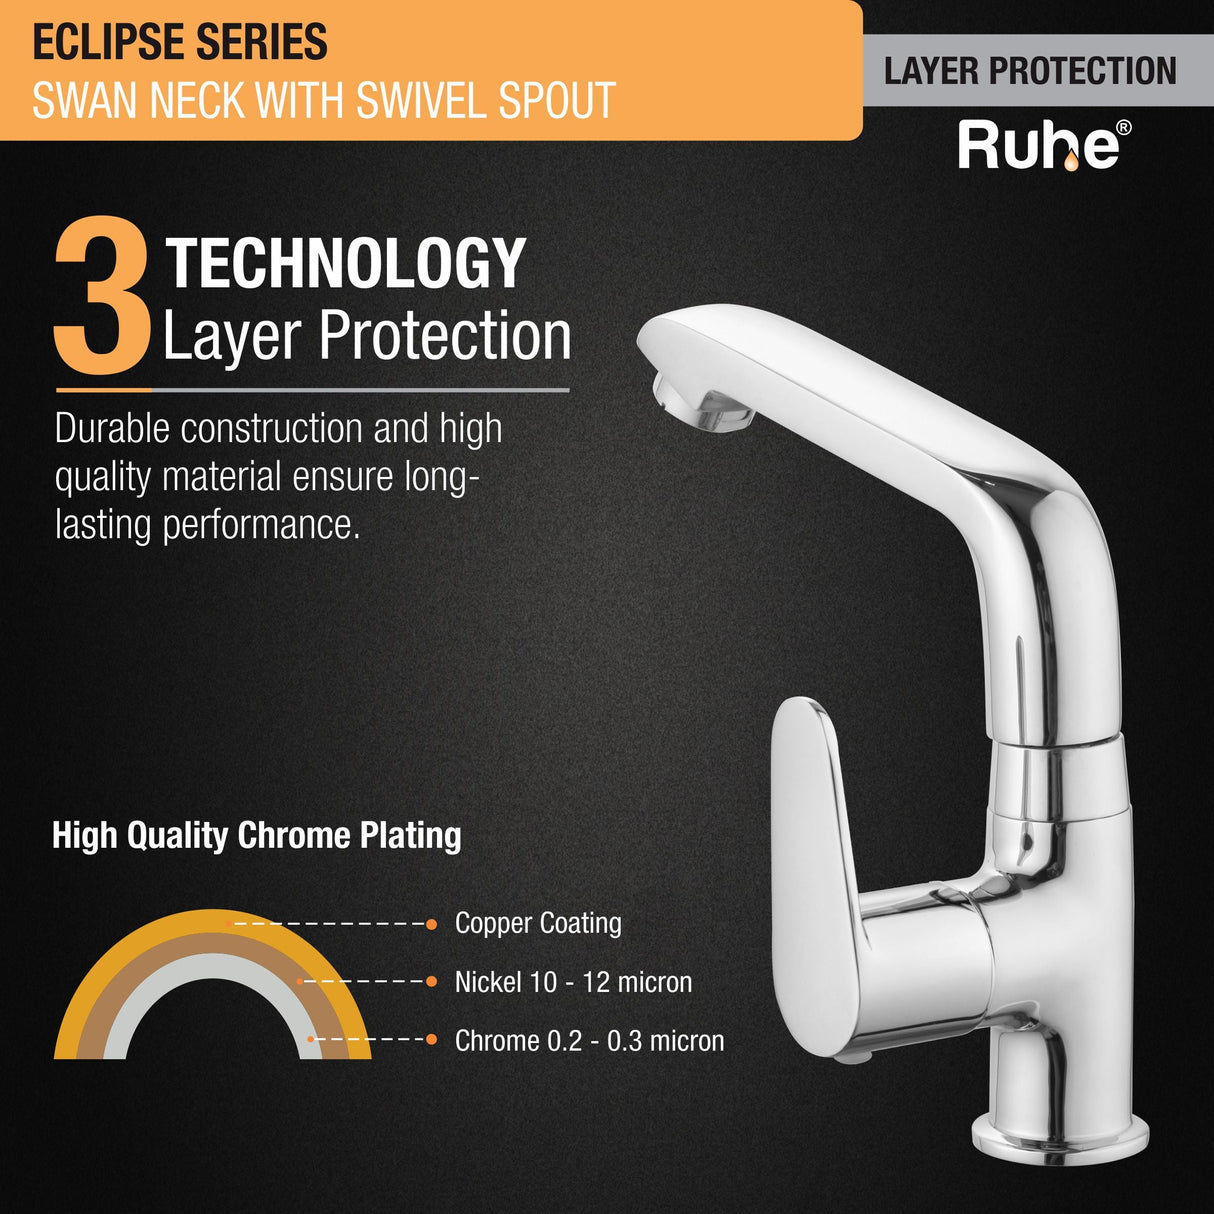 Eclipse Swan Neck with Small (7 inches) Swivel Spout Faucet 3 layer protection